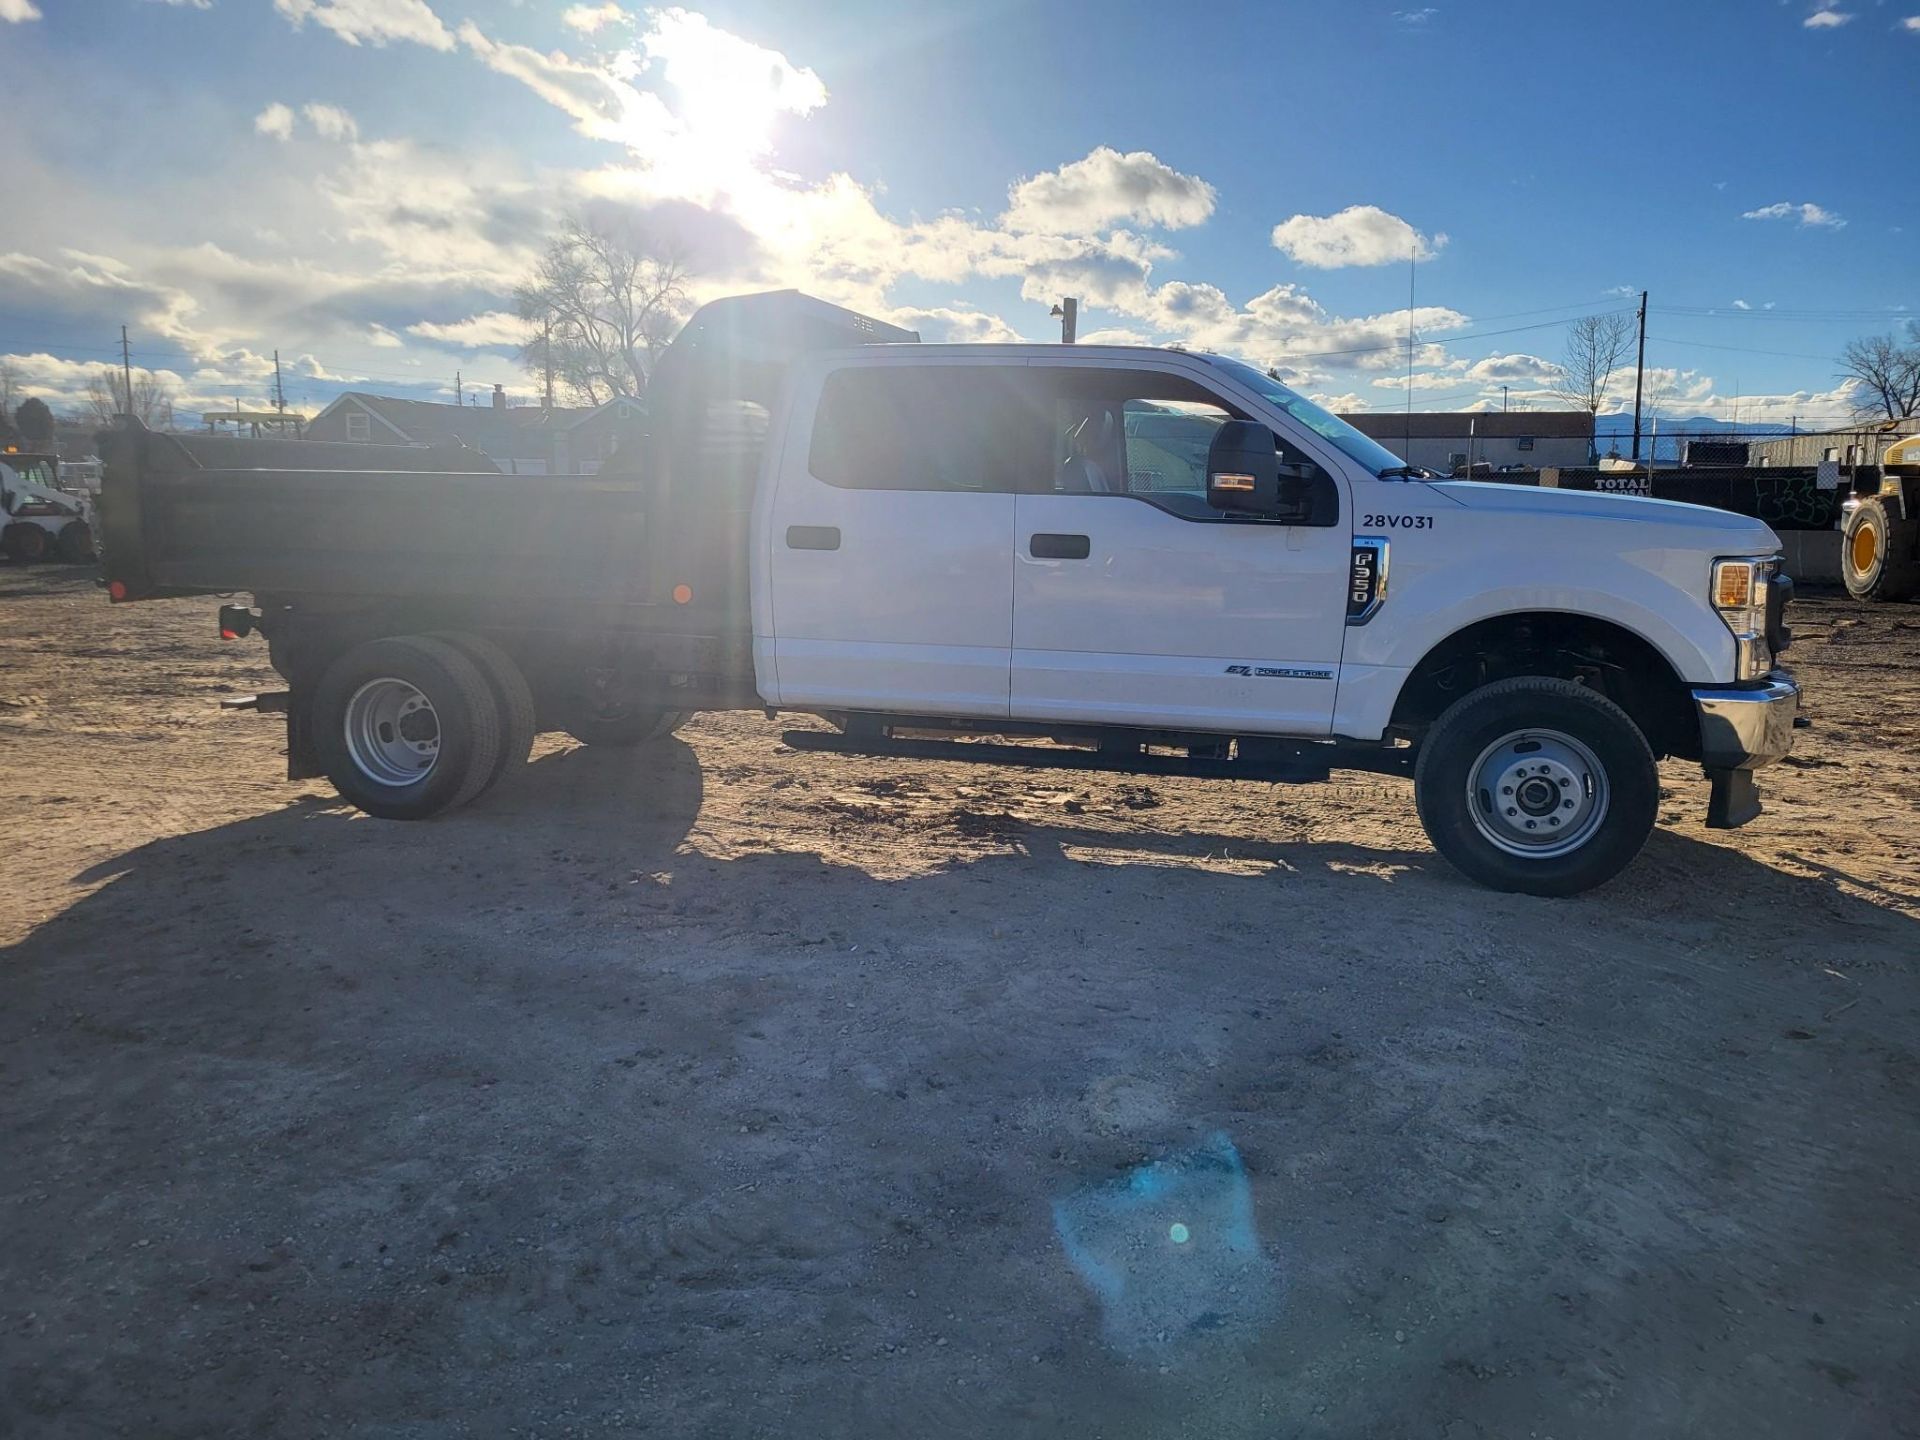 2021 FORD F350 CREW CAB DUALLY DIESEL FLATBED DUMP TRUCK 19,500 MILES! - Image 6 of 37